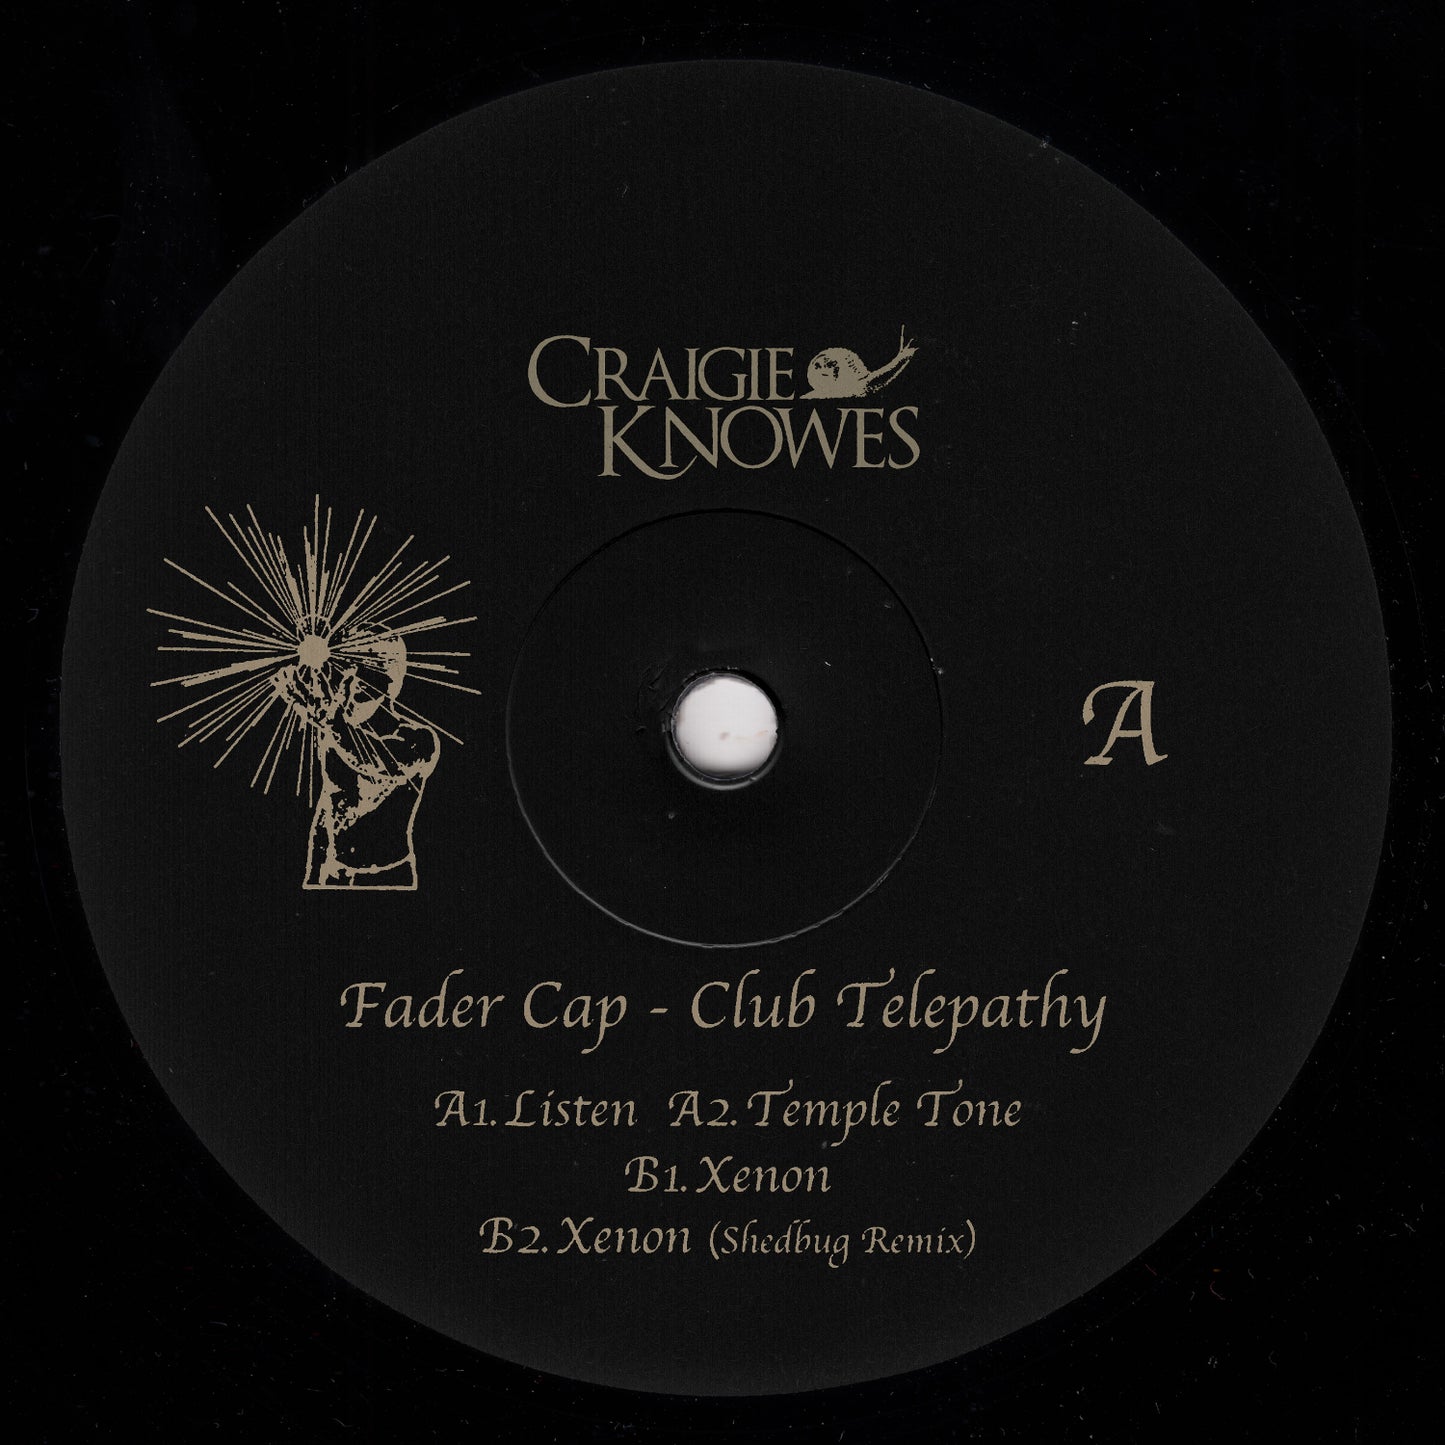 Fader Cap - Club Telepathy EP Craigie Knowes CKNOWEP44 Trance Techno Breakbeat front cover